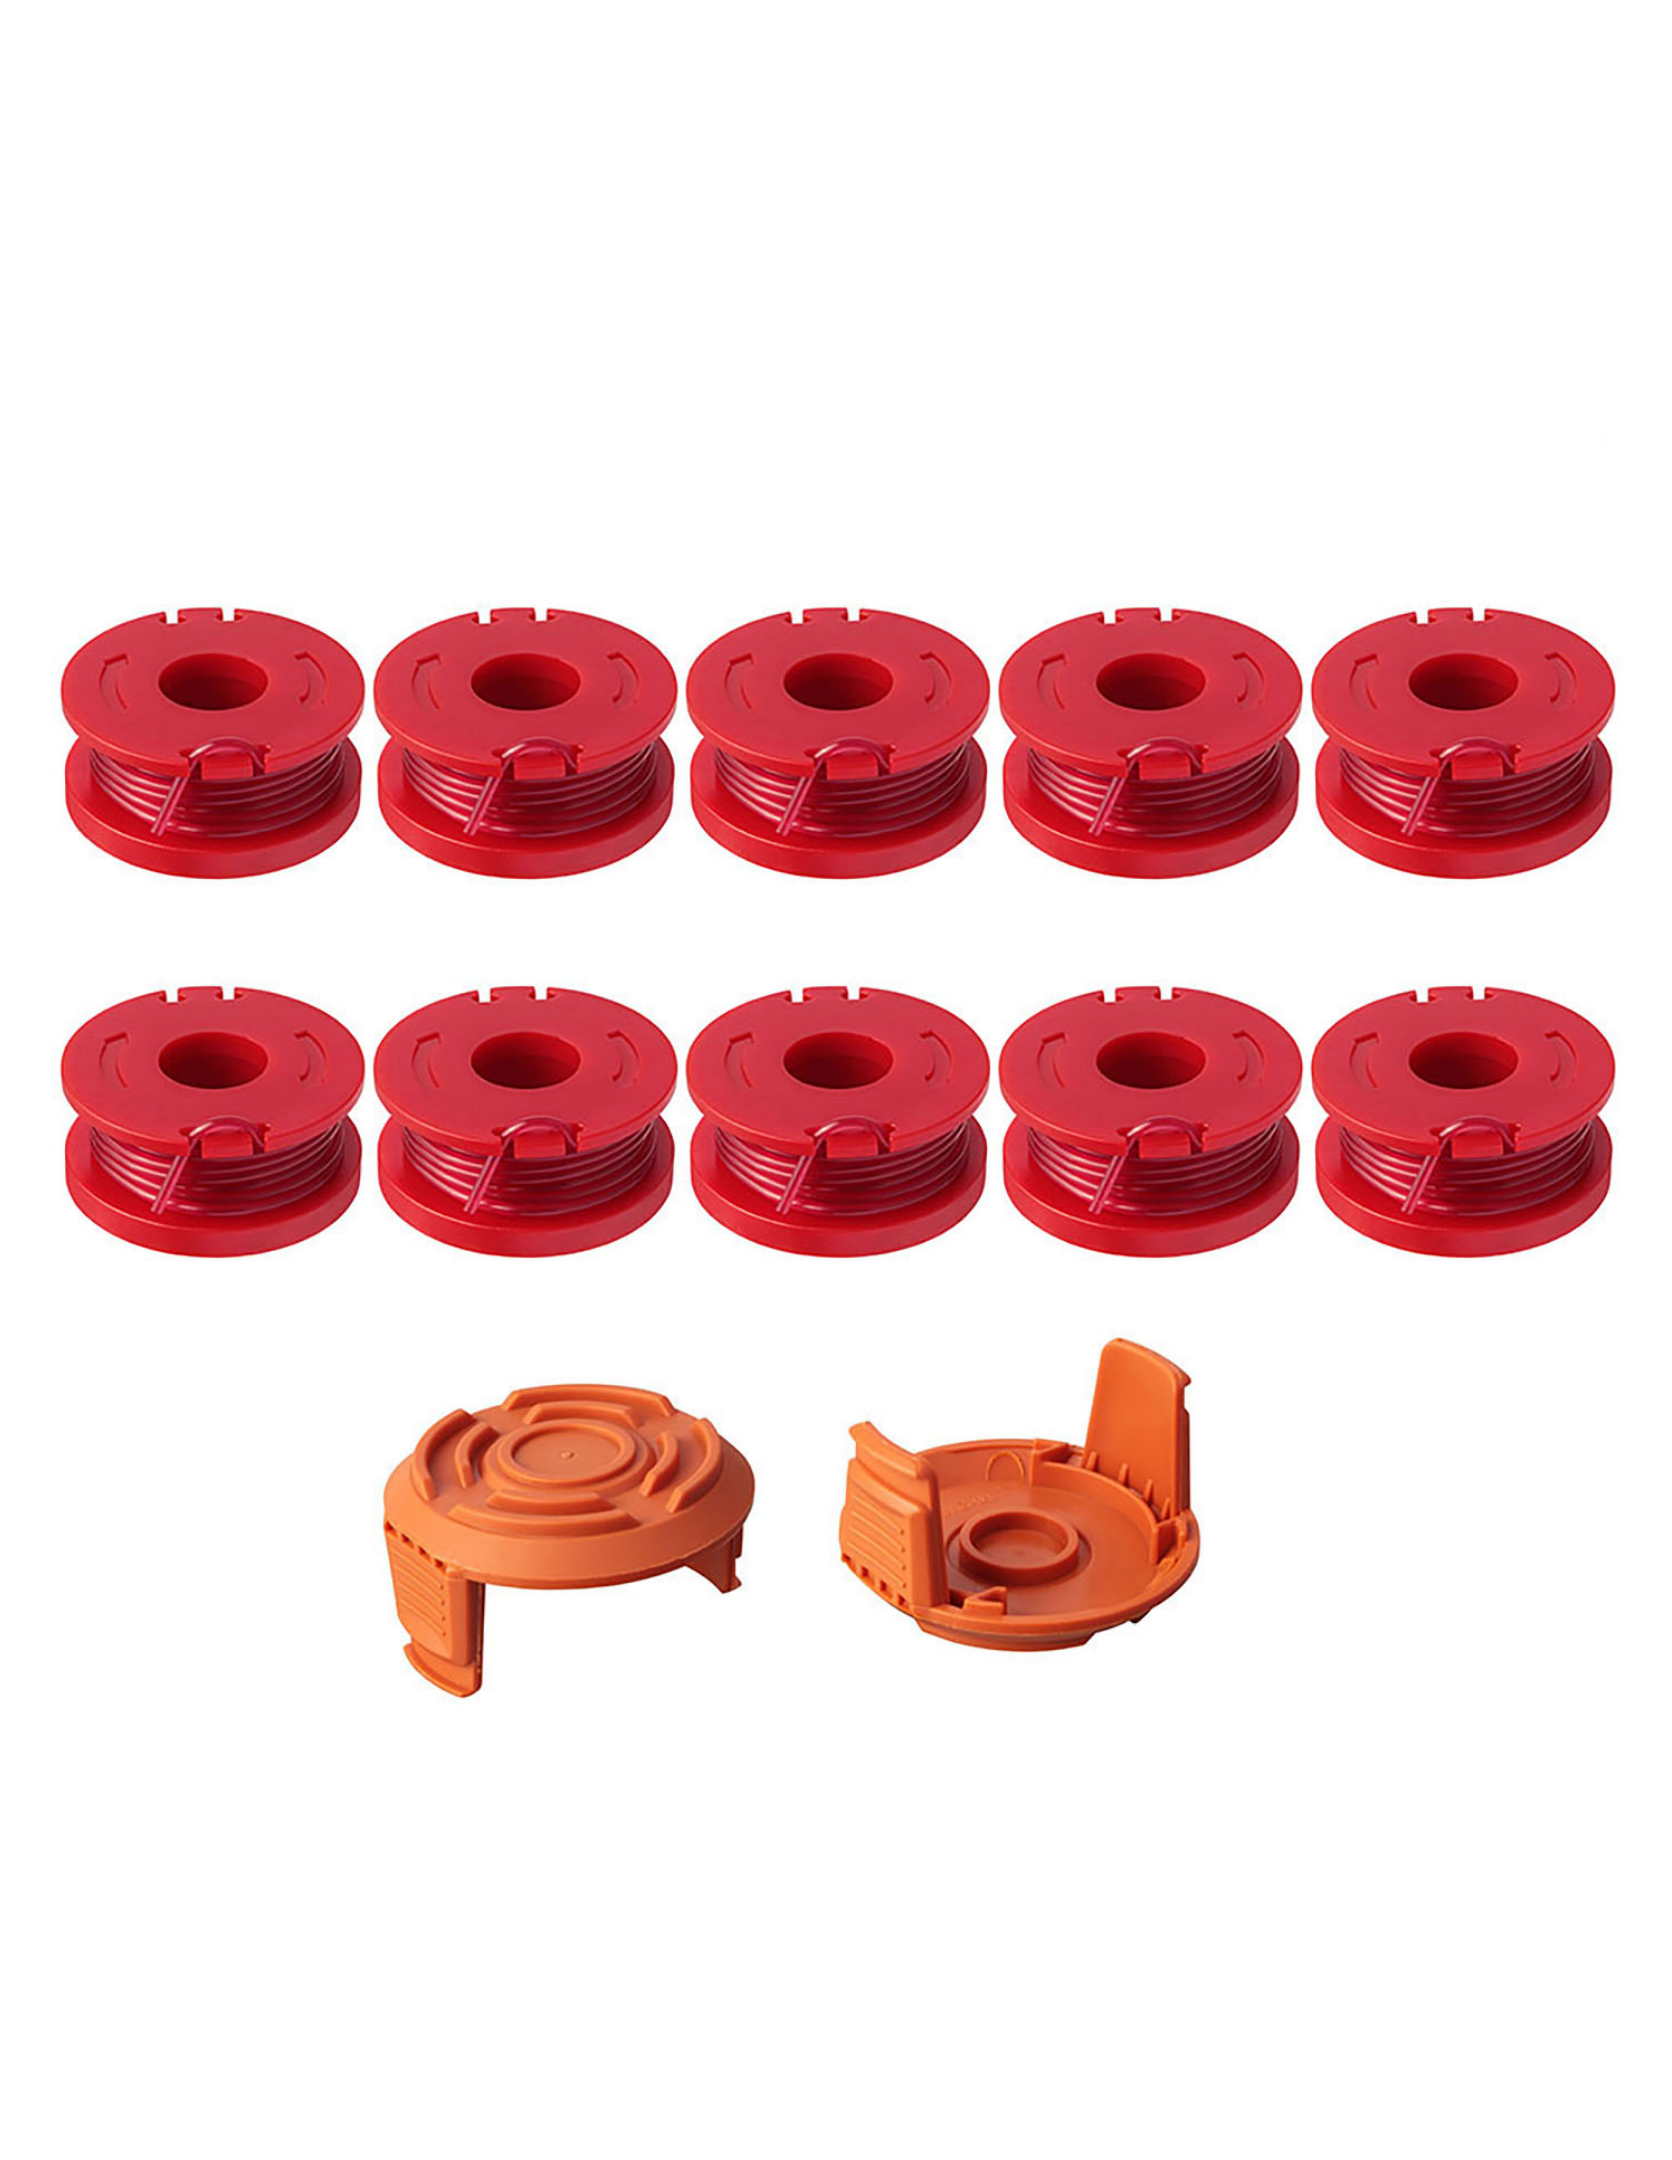 THTEN Edger Spools Replacement for Worx WG180 WG163 WA0010 Weed Wacker Eater String with WA6531 GT Spool Cover 50006531 String Trimmer Refills 10ft 0.065”(10 Spool, 2 Cap)